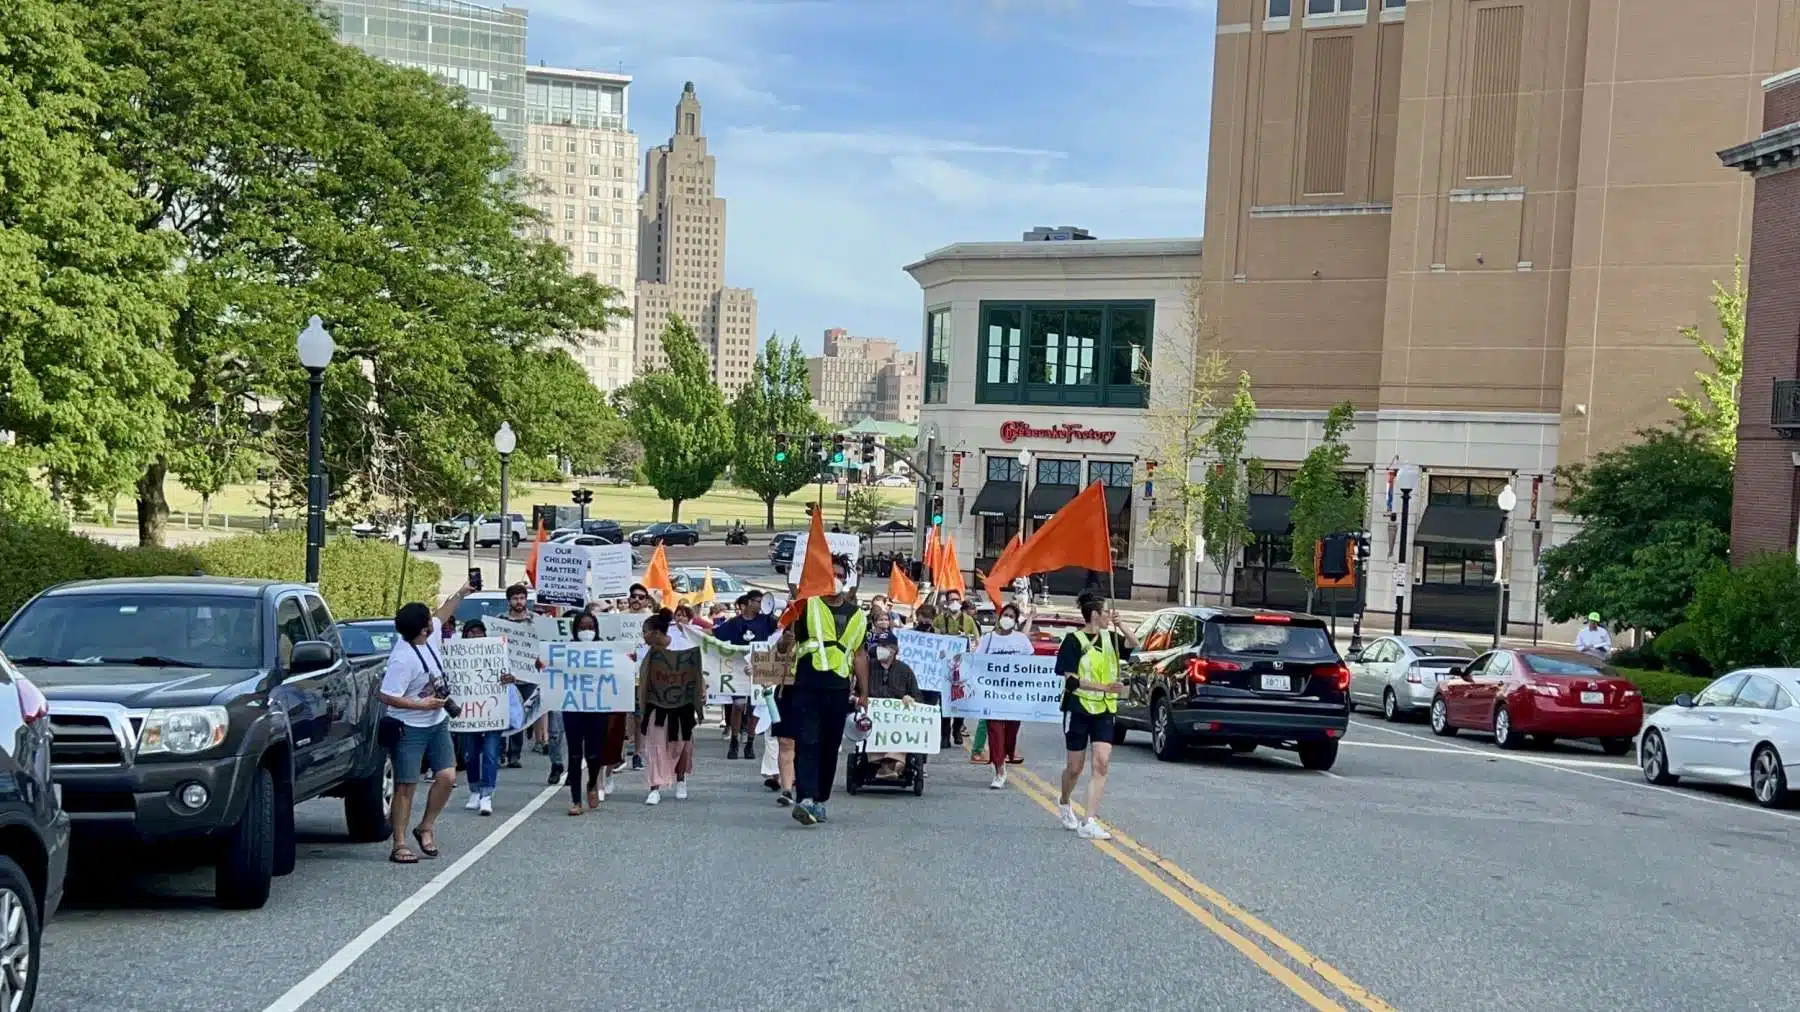 Activists rally at RI State House to end mass criminalization